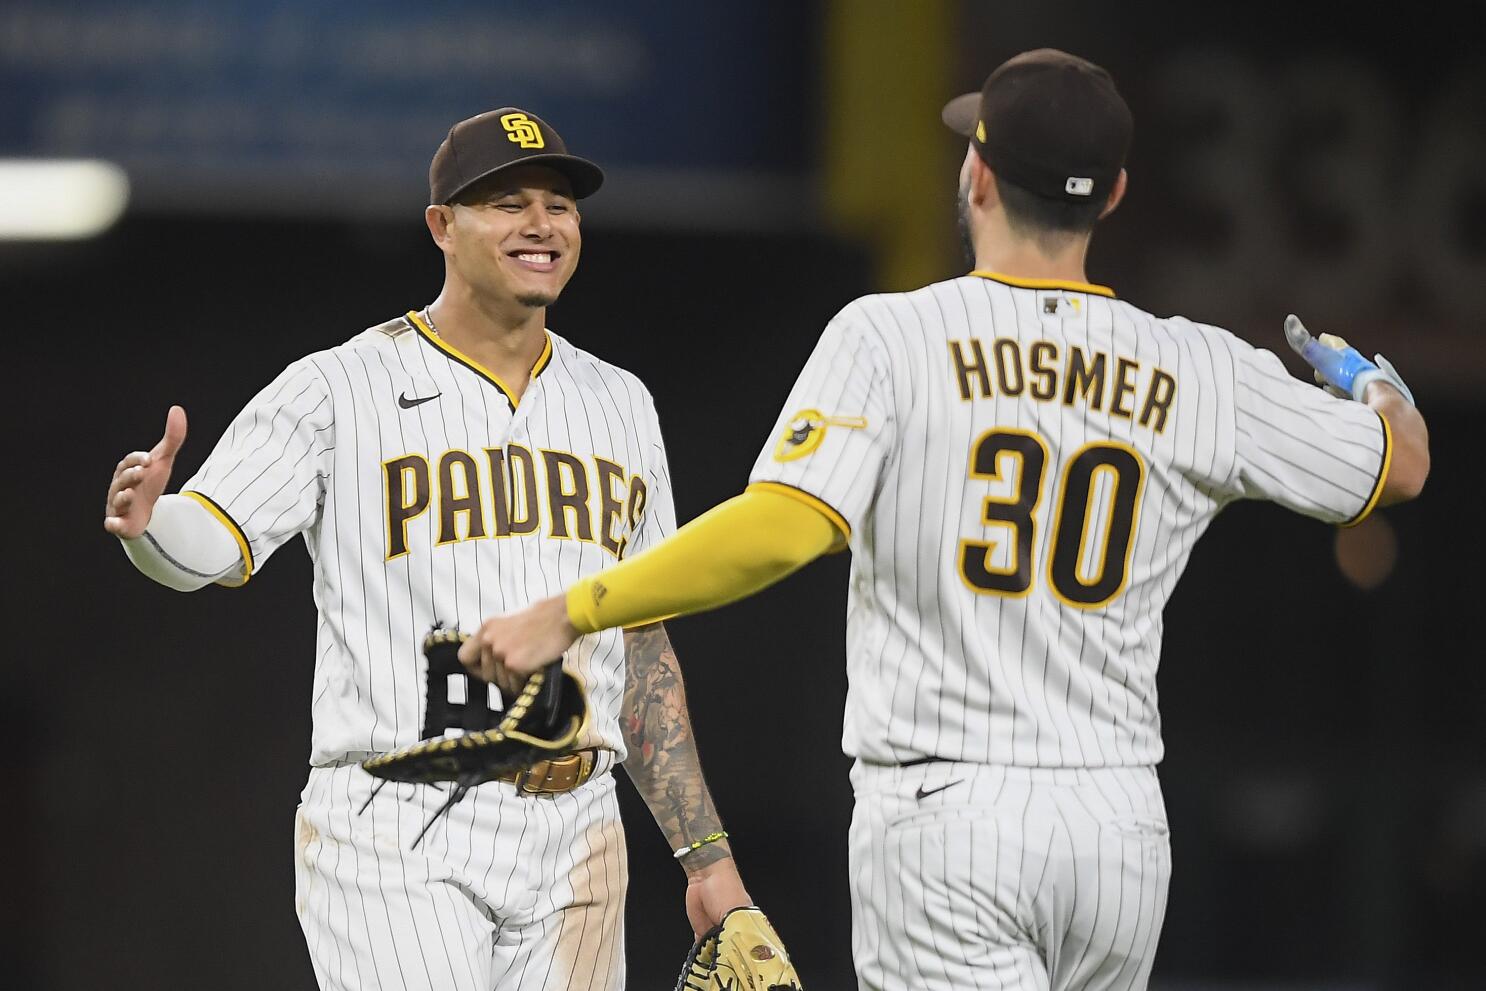 Only thing Hosmer knows is it would be great to have Harper, Machado on  Padres